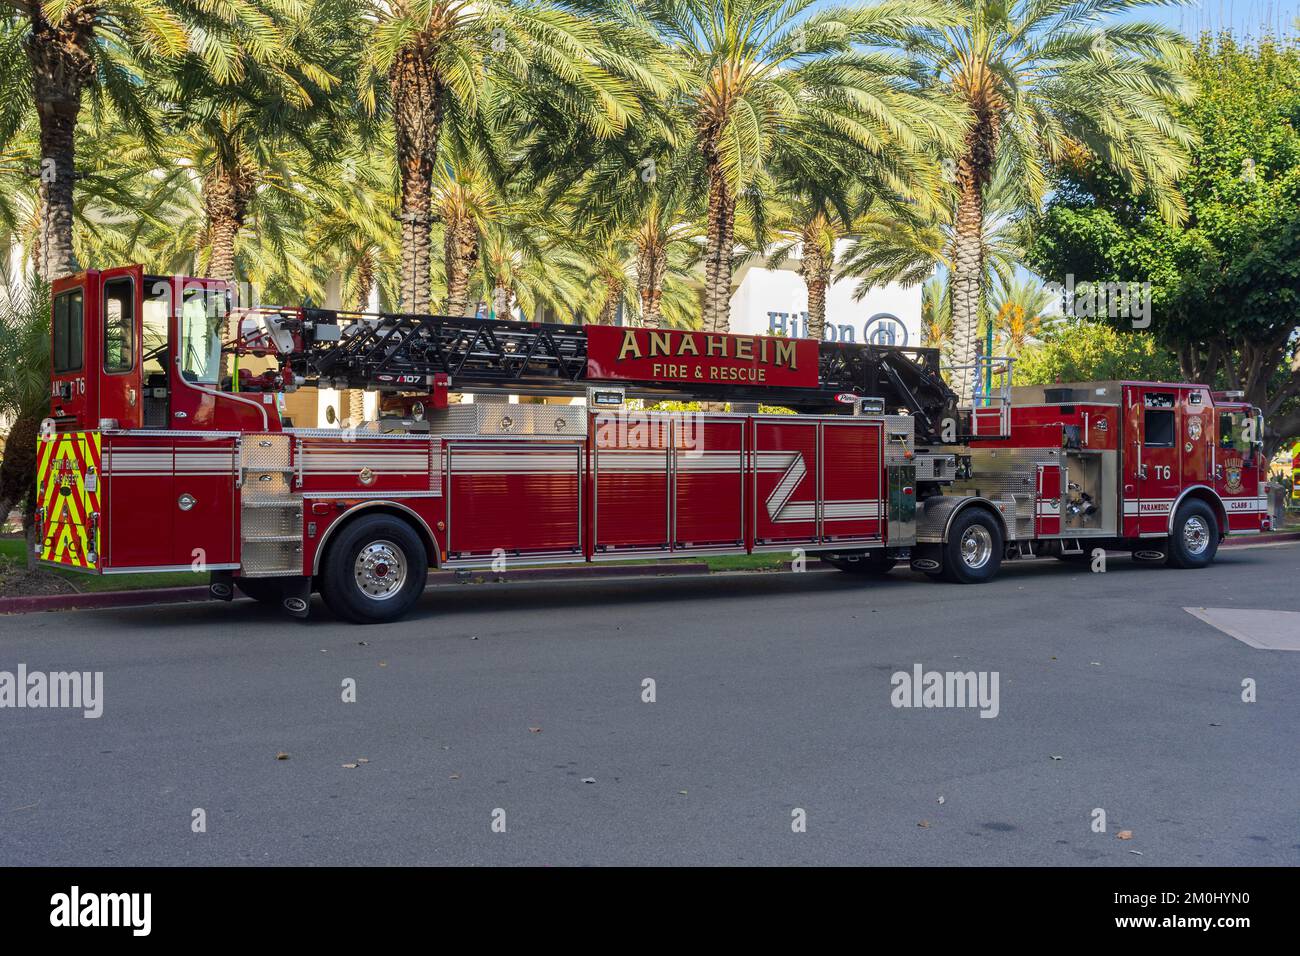 Anaheim, CA, USA – November 1, 2022: A Anaheim Fire and Rescue heavy duty tiller aerial ladder semi truck parked at Convention Way in Anaheim, Califor Stock Photo